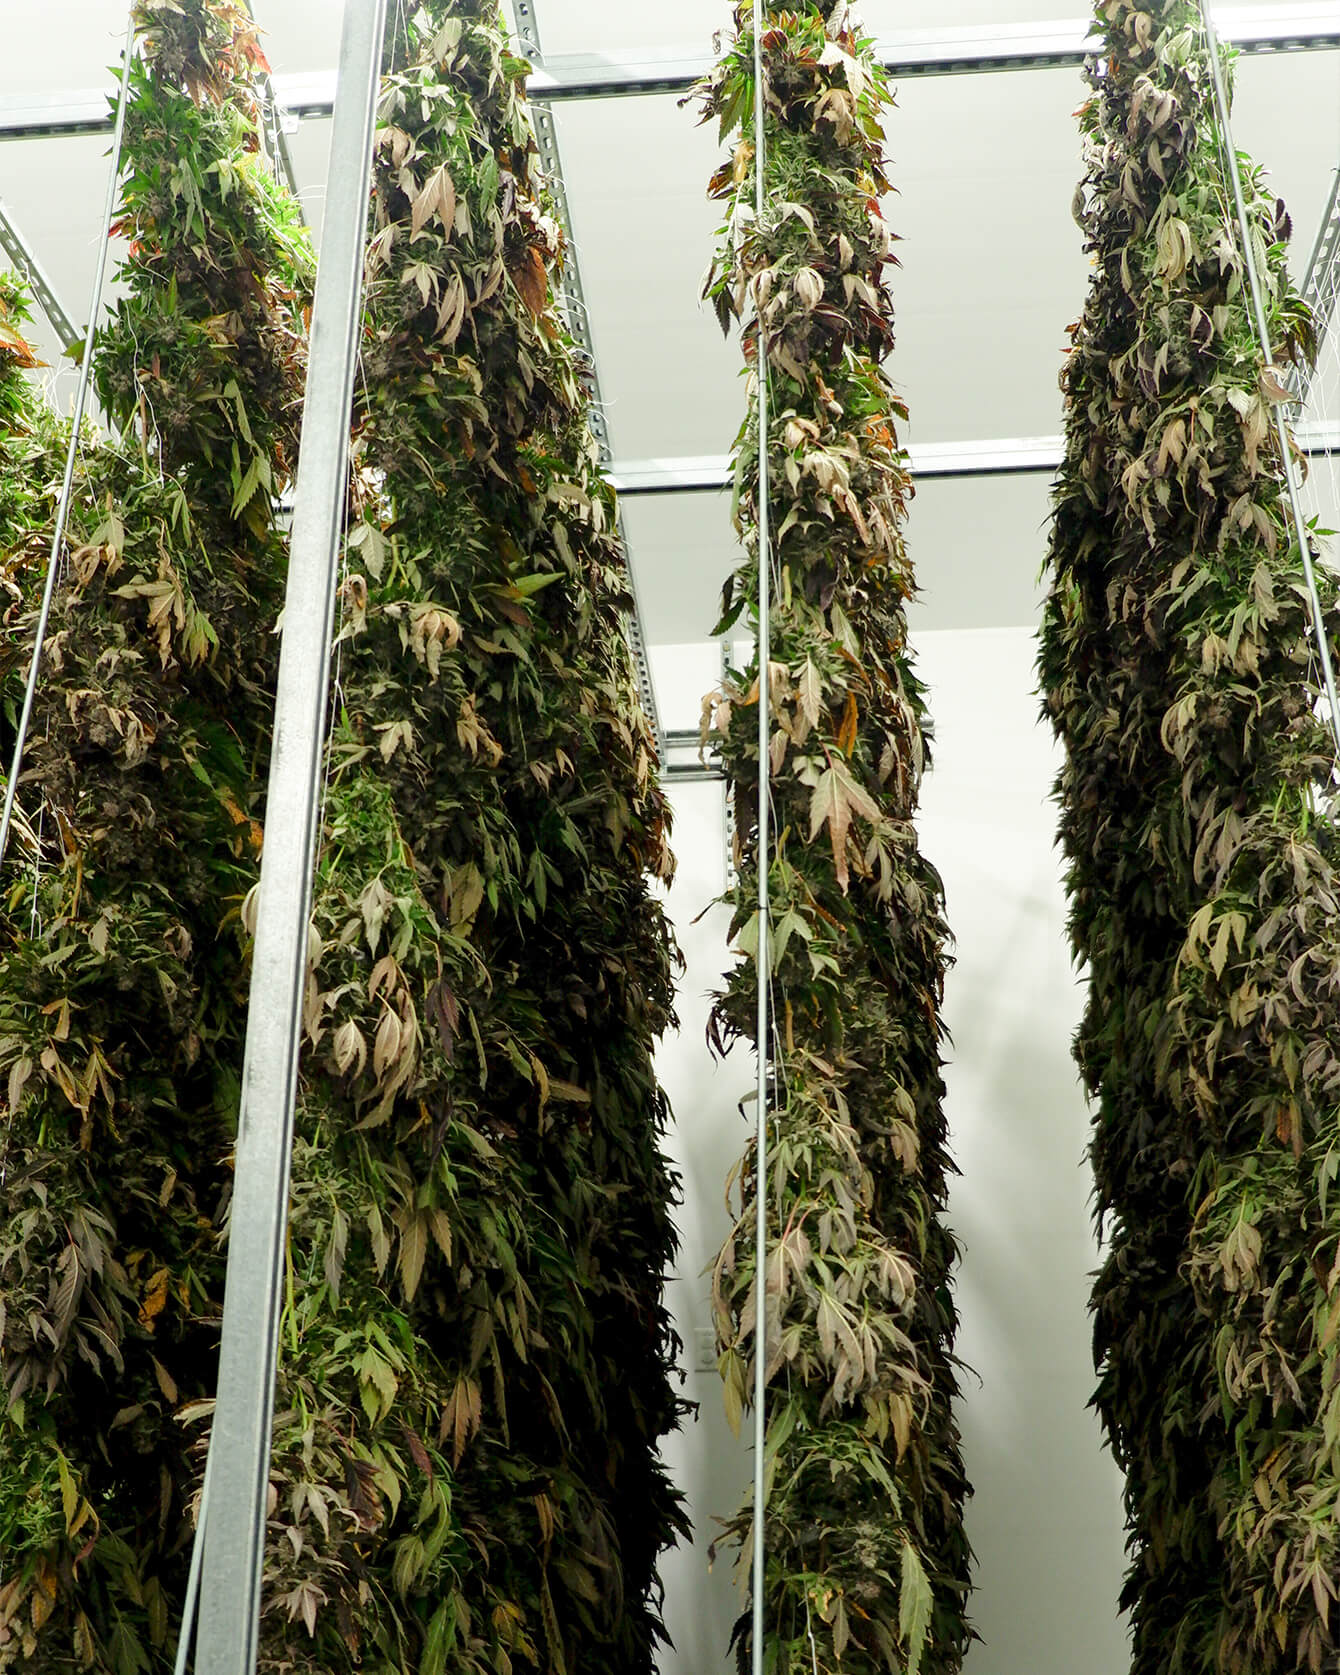 Image of Cannabis Buds being hang-dried